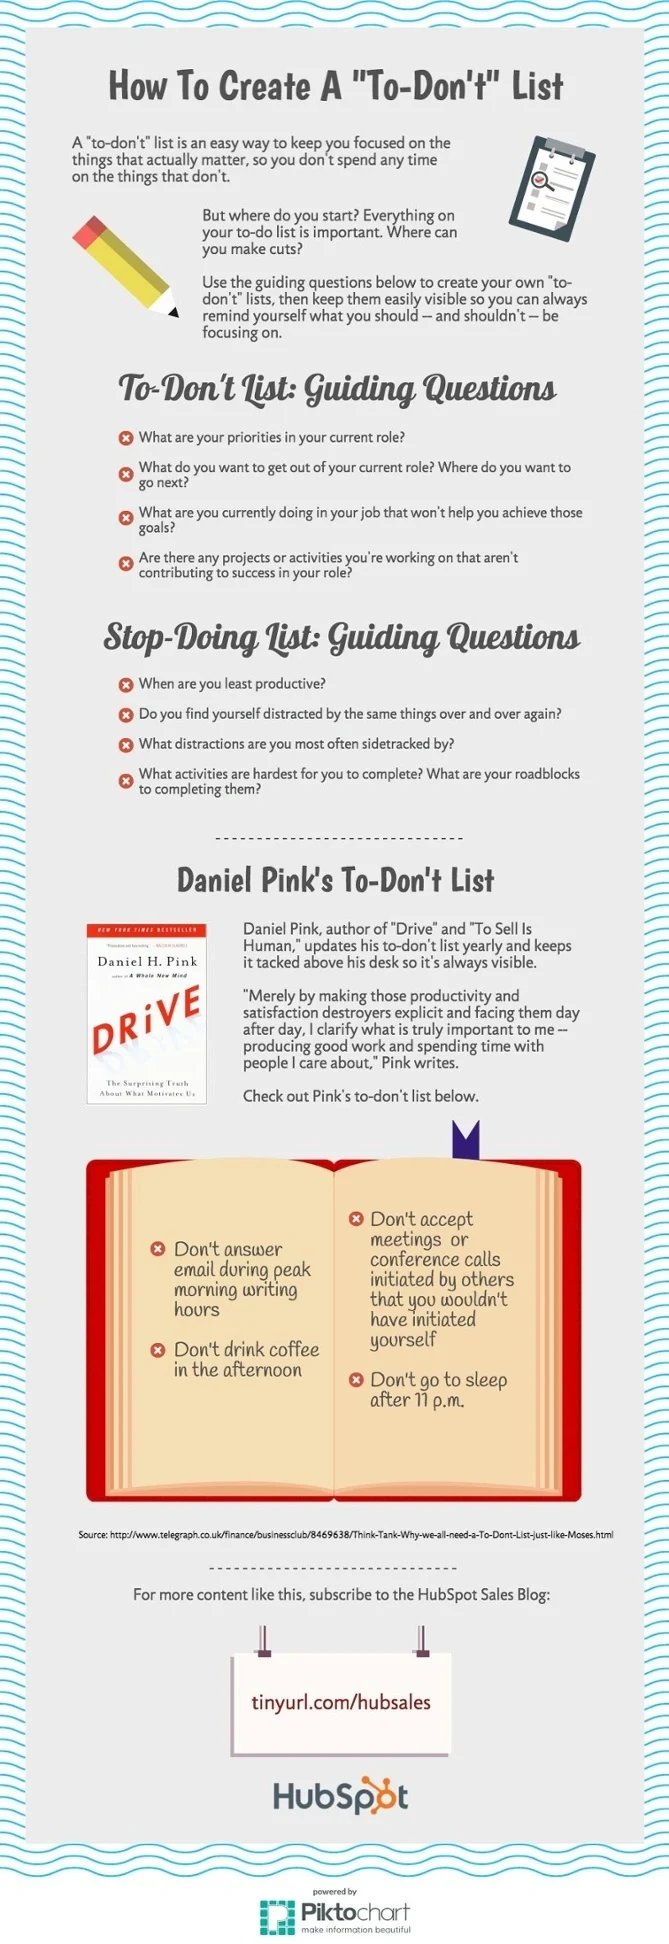 to-dont-list-infographic